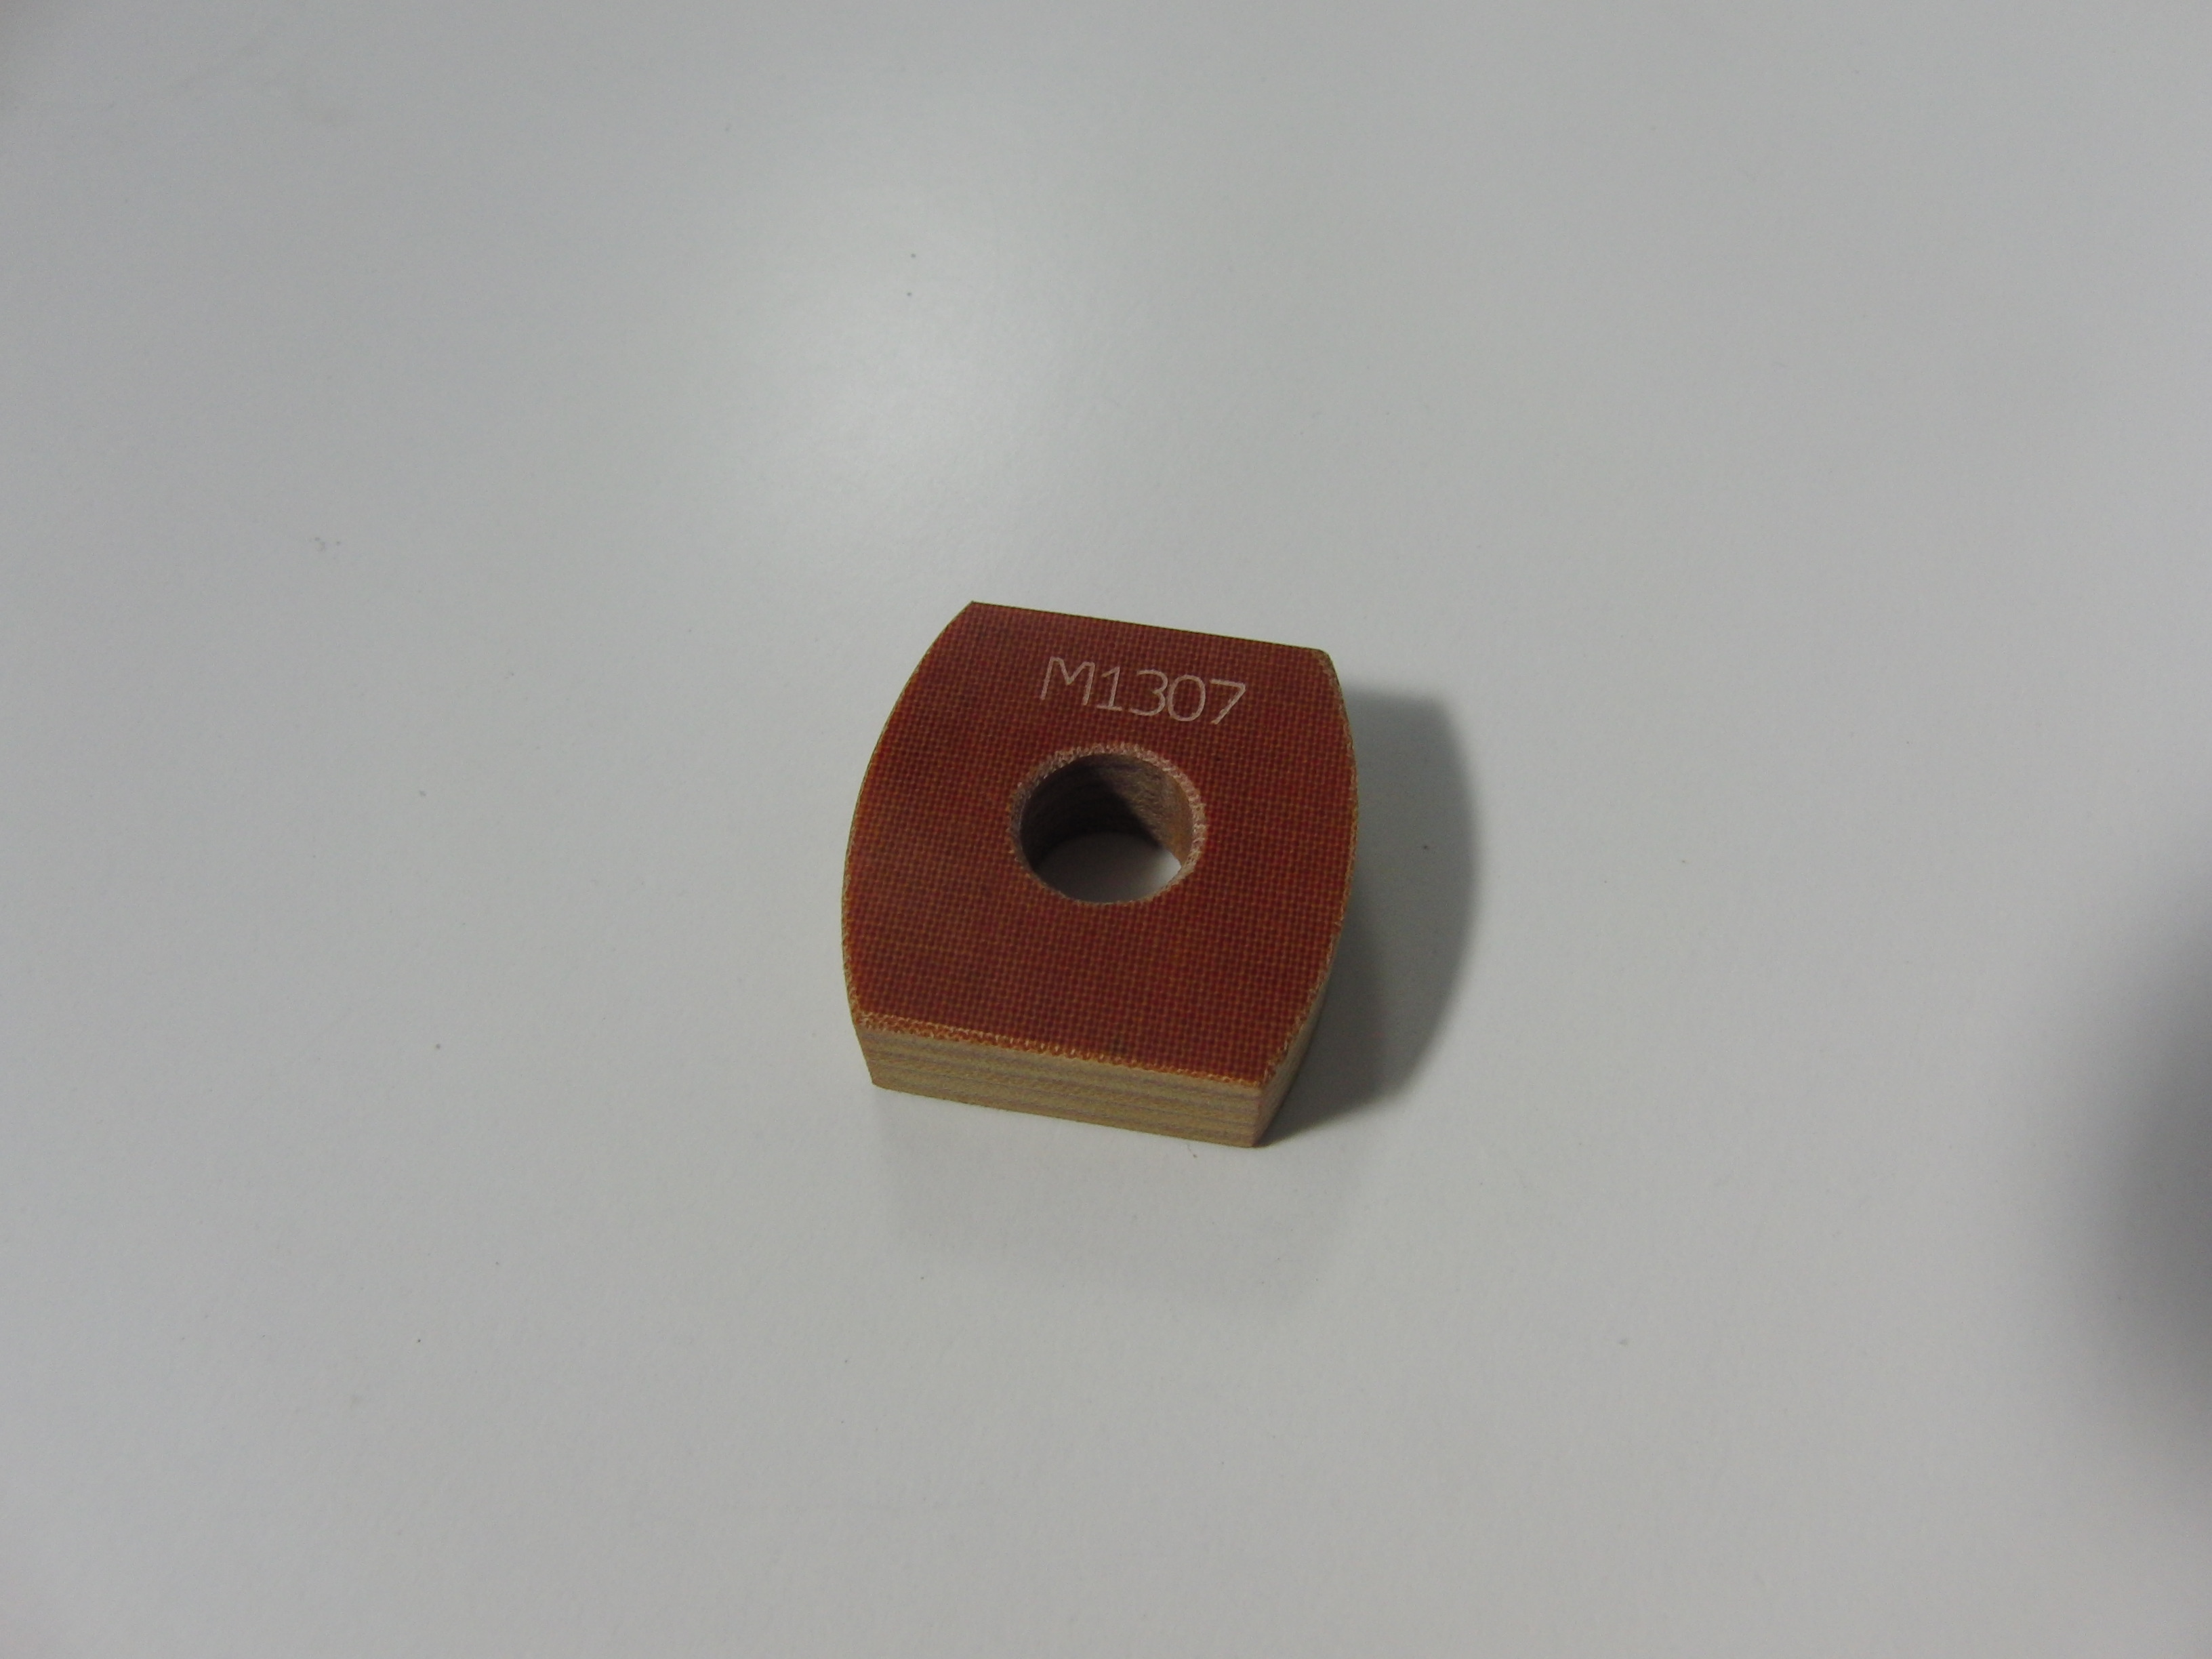 INSULATING PLUG FOR TEMPERING OPERATION